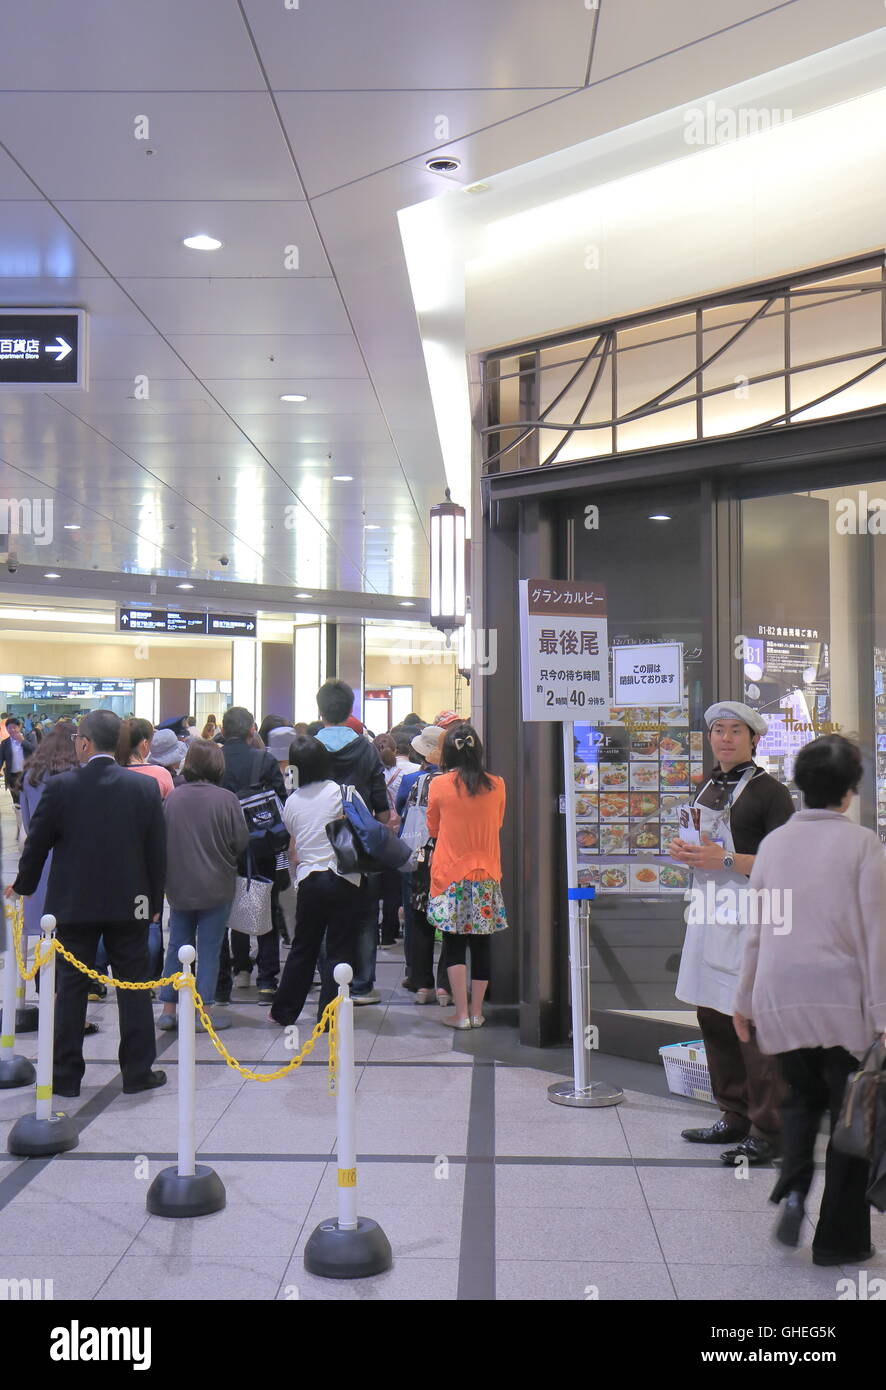 People queue for 2.5 hours to buy Grand Calbee at Grand Calbee shop in Umeda in Osaka Japan. Stock Photo